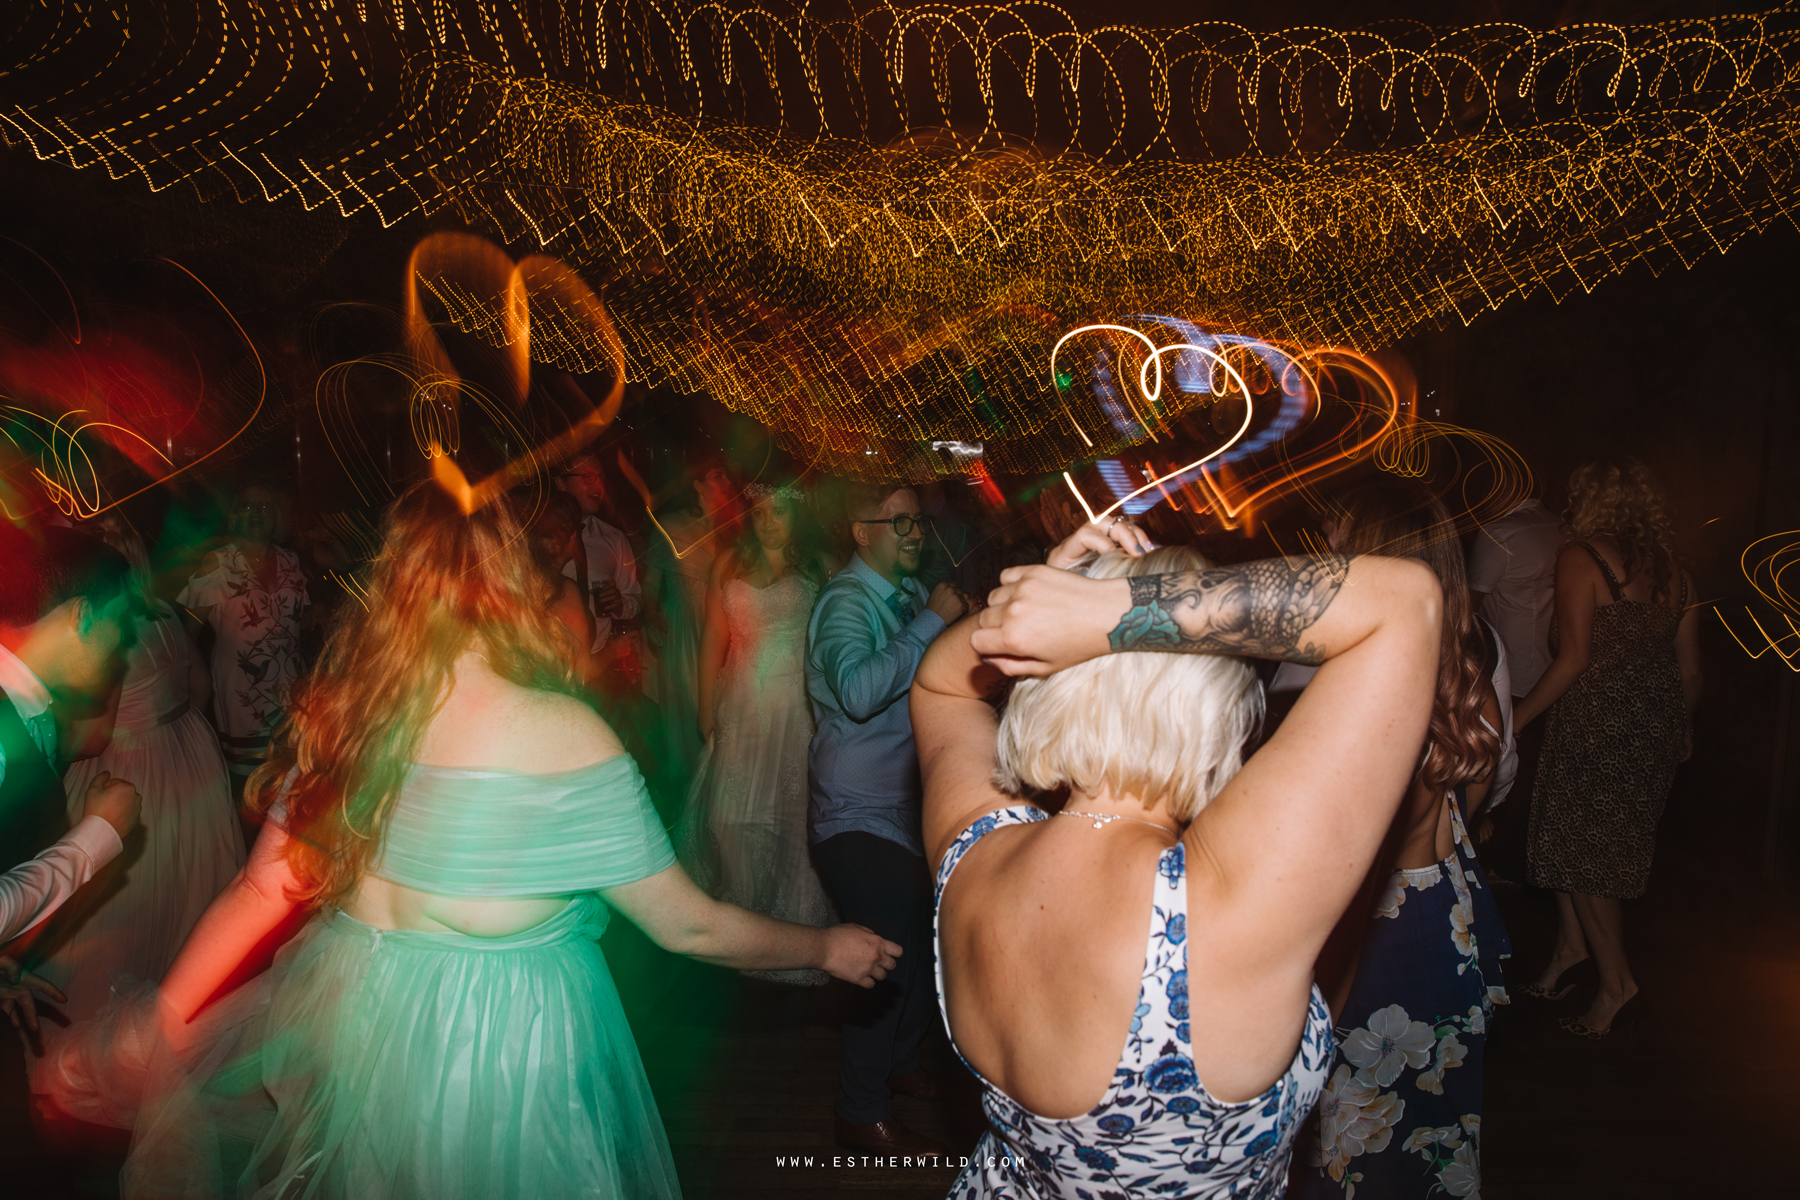 Norwich_Castle_Arcade_Grosvenor_Chip_Birdcage_Cathedral_Cloisters_Refectory_Wedding_Photography_Esther_Wild_Photographer_Norfolk_Kings_Lynn_3R8A3337.jpg